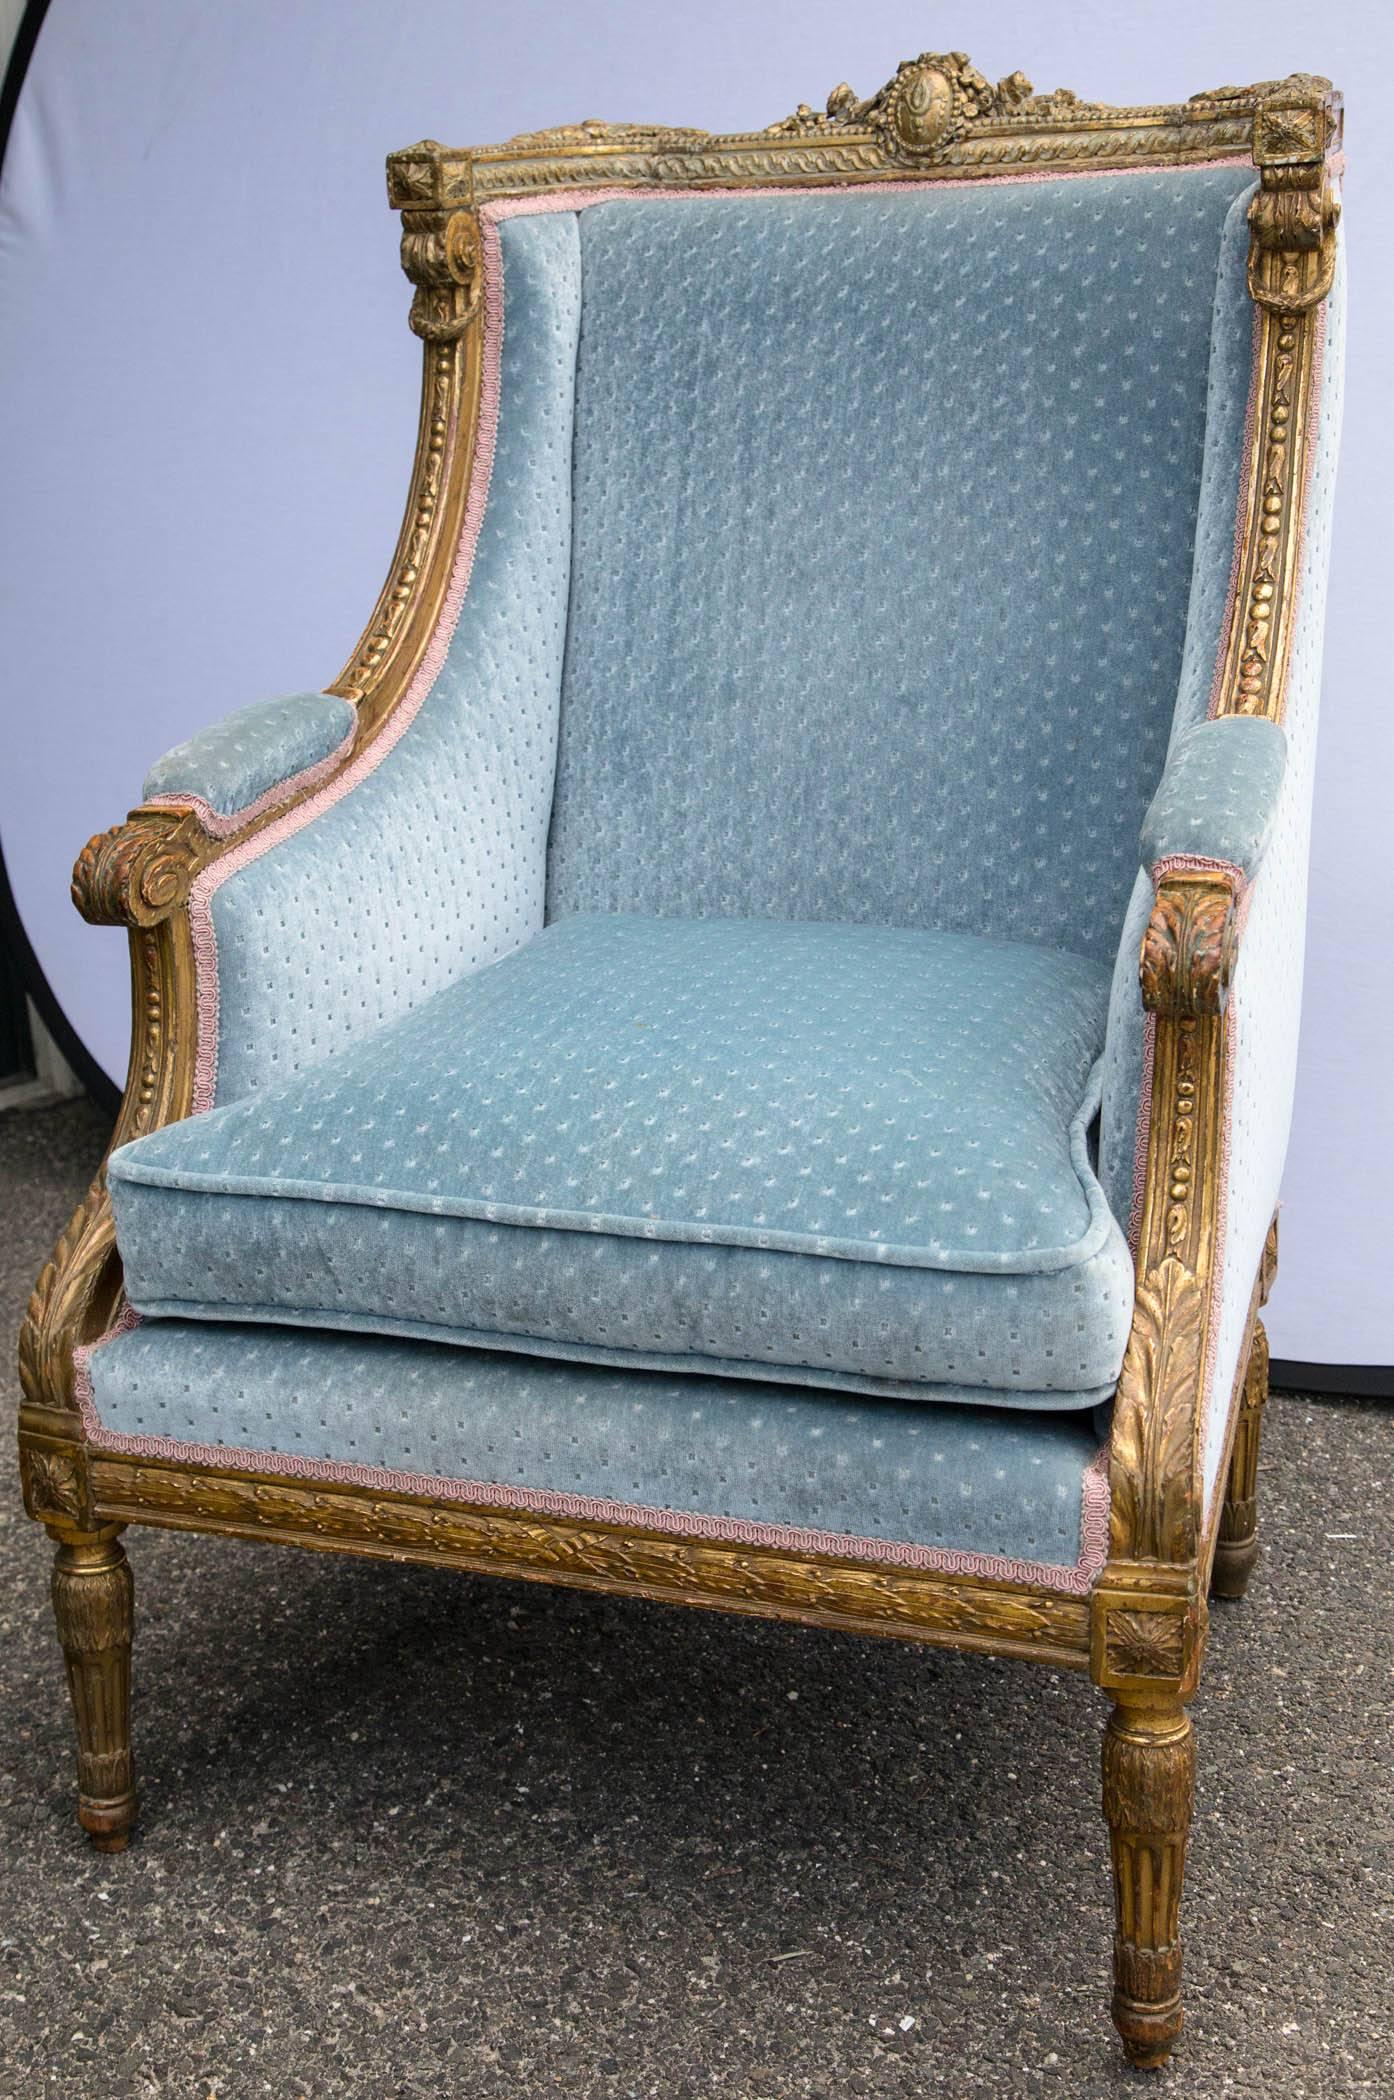 This chair is fully carved with a central crest on the top rail, acanthus leaves, flowers, palmettes and more. Fully upholstered.